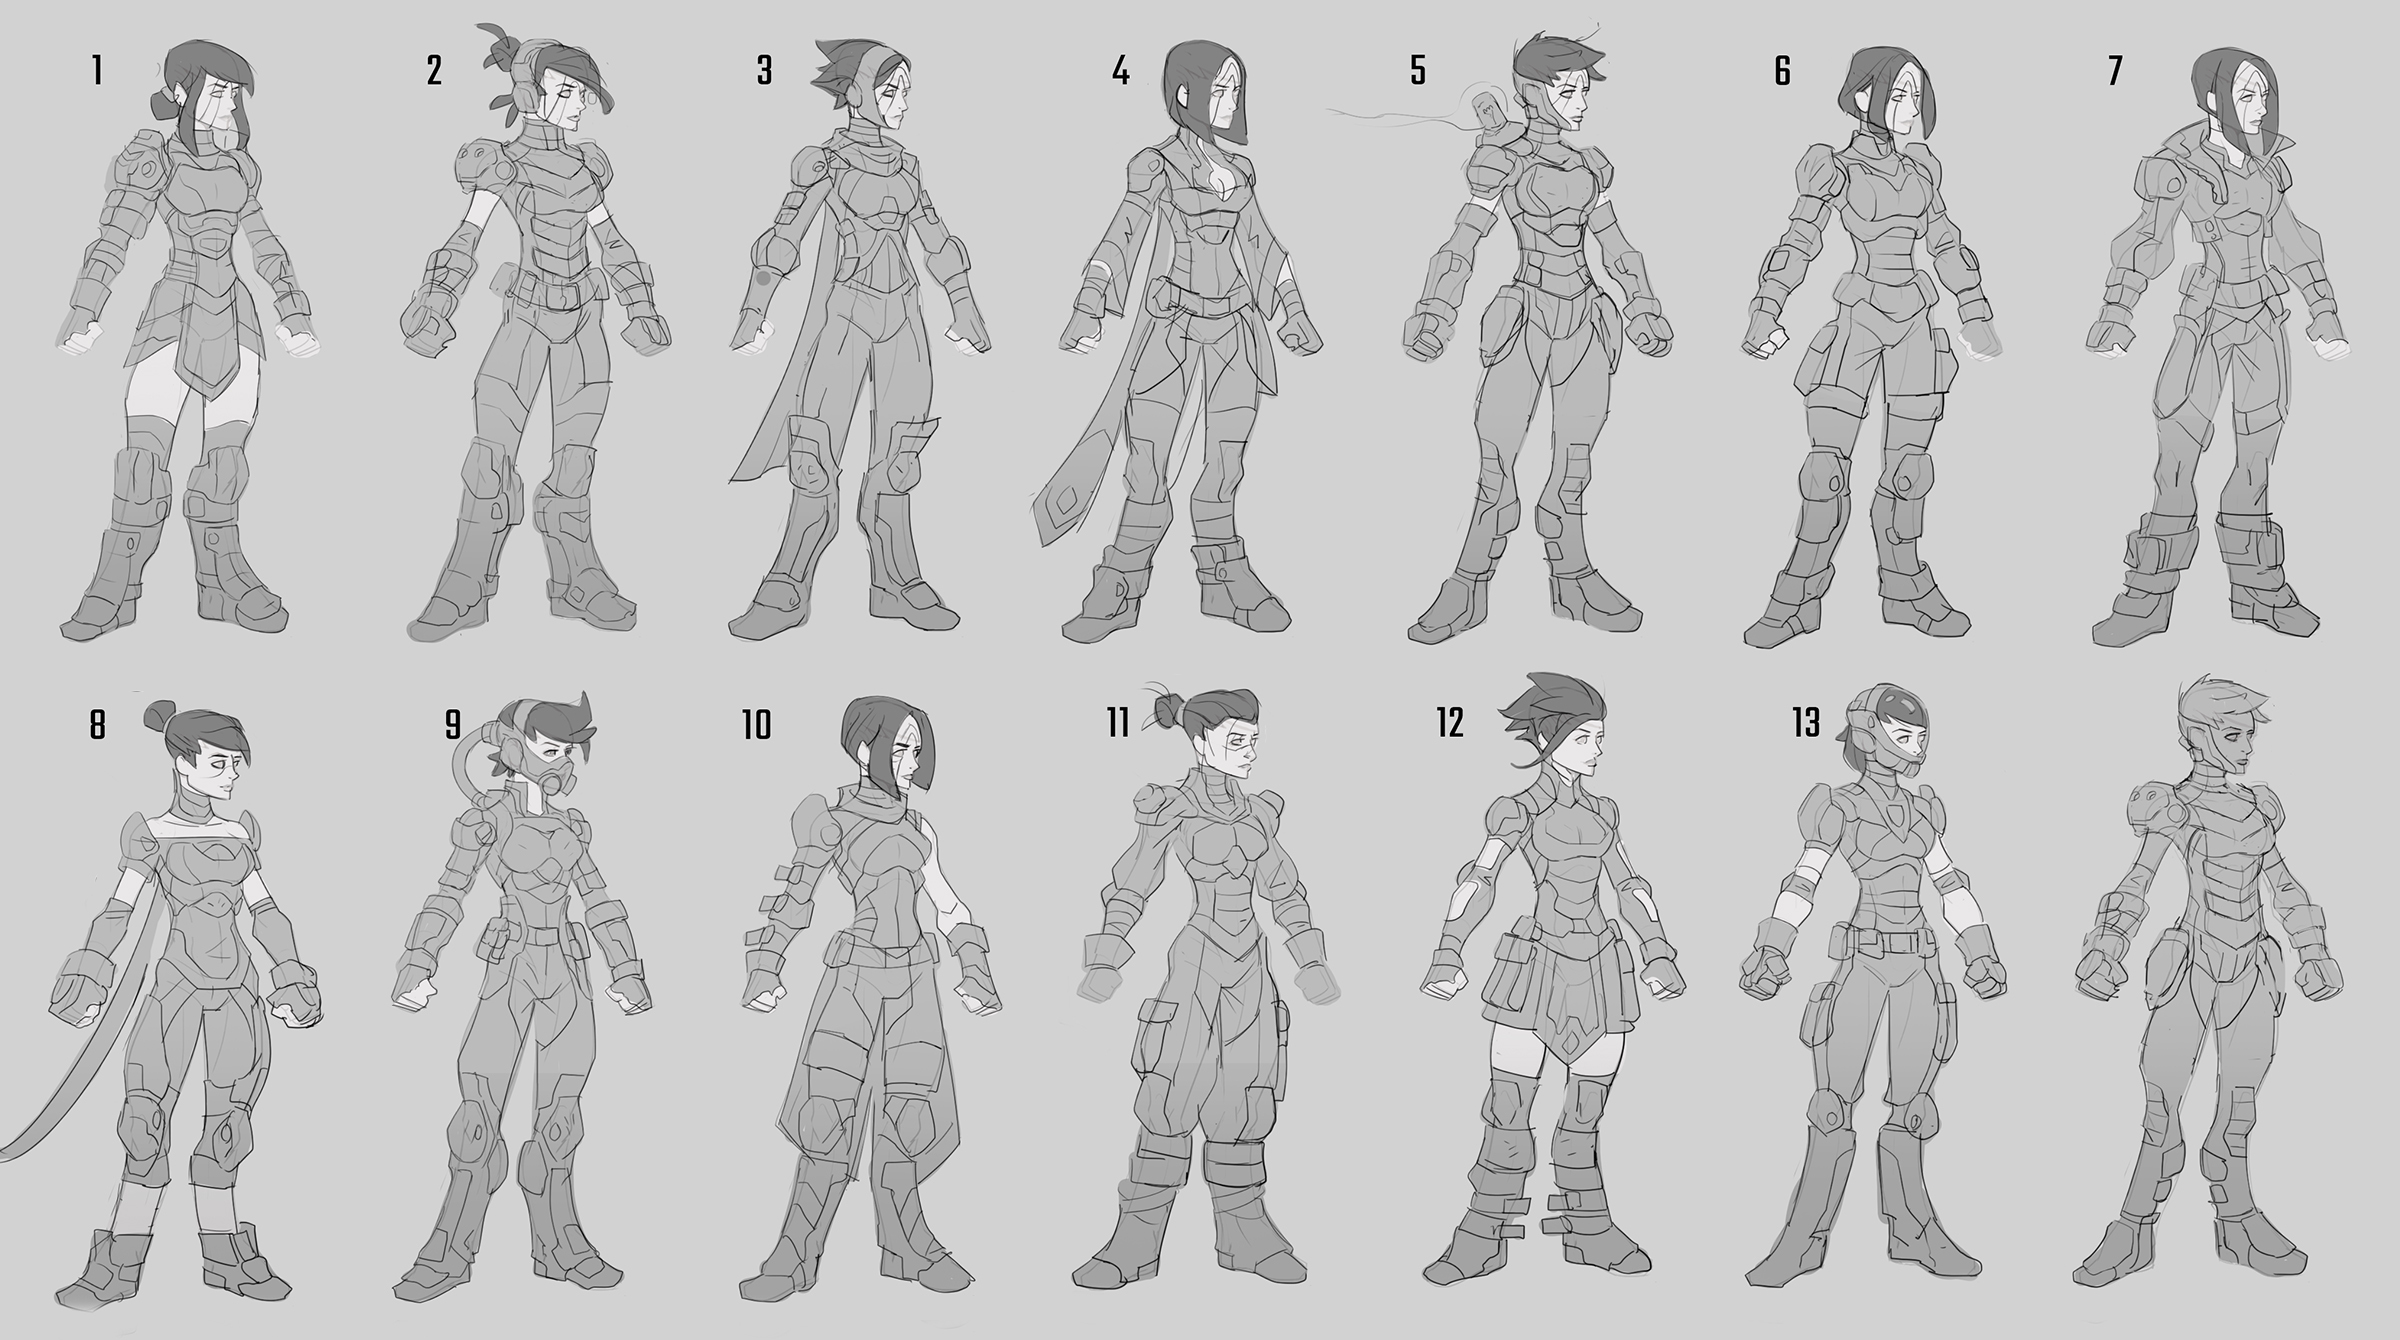 The team had a lot of freedom to create a tough female protagonist